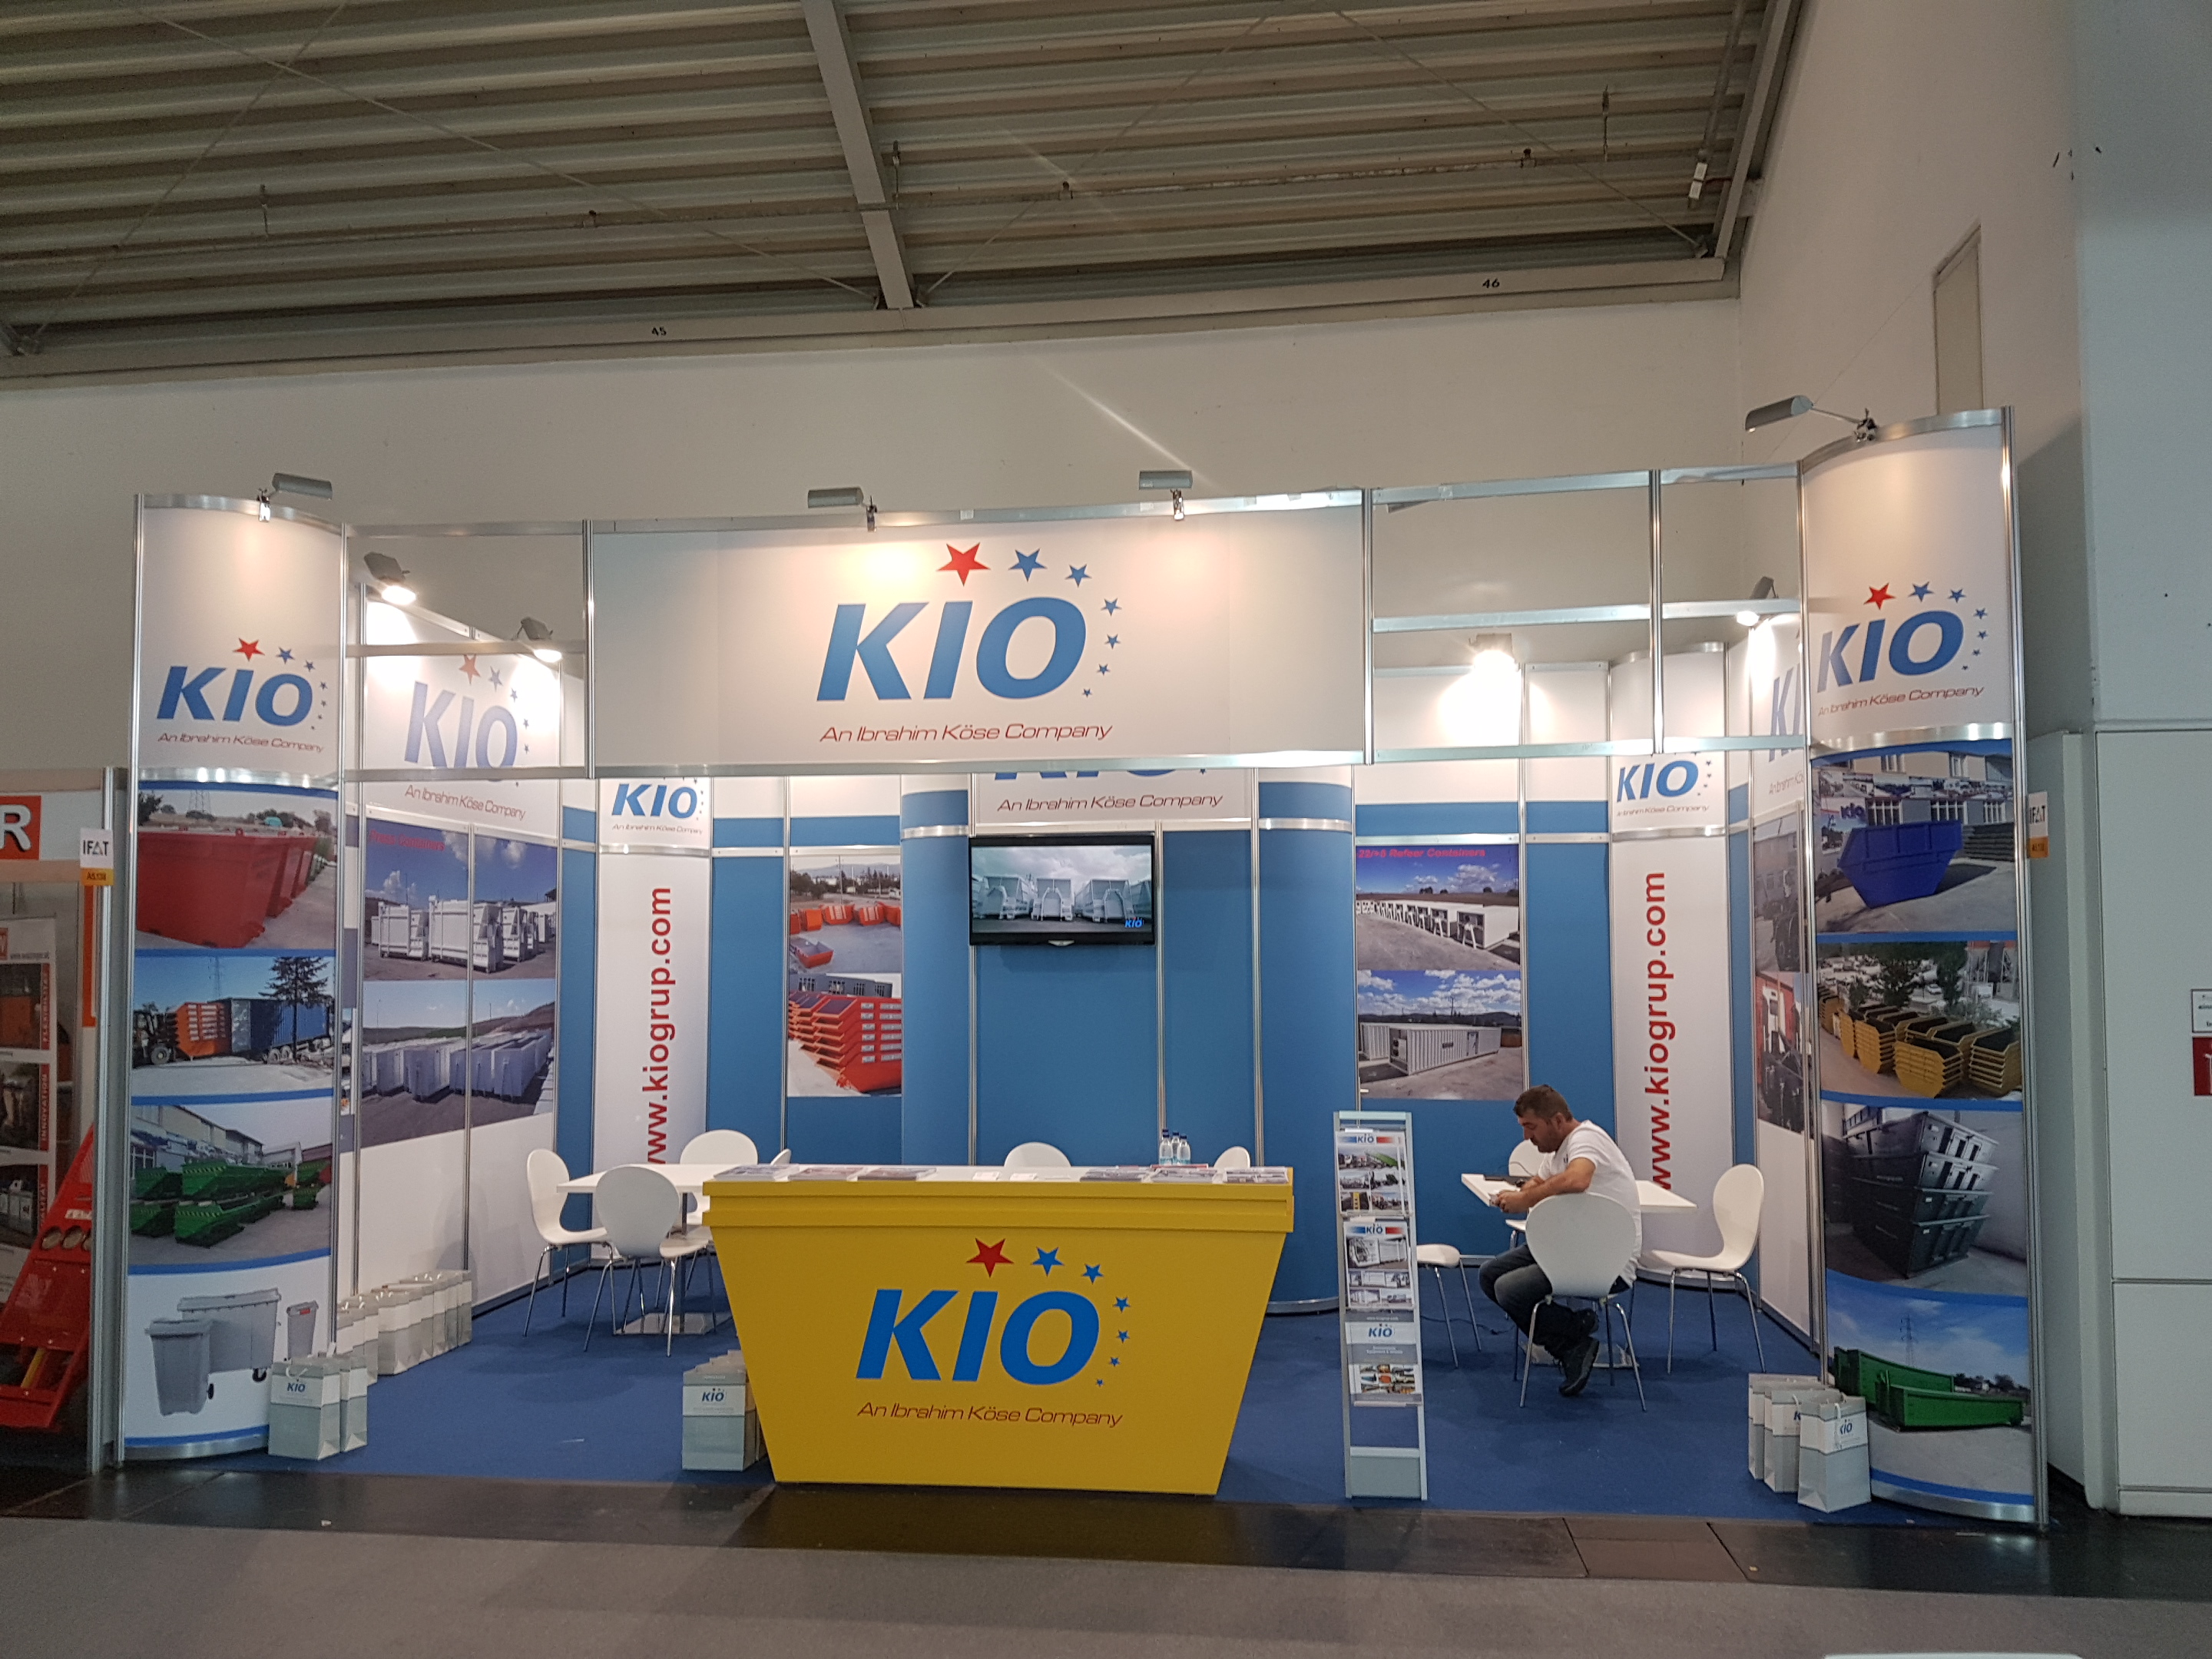 We were in IFAT 2018 between 14th and 18th May in Munich, Germany.